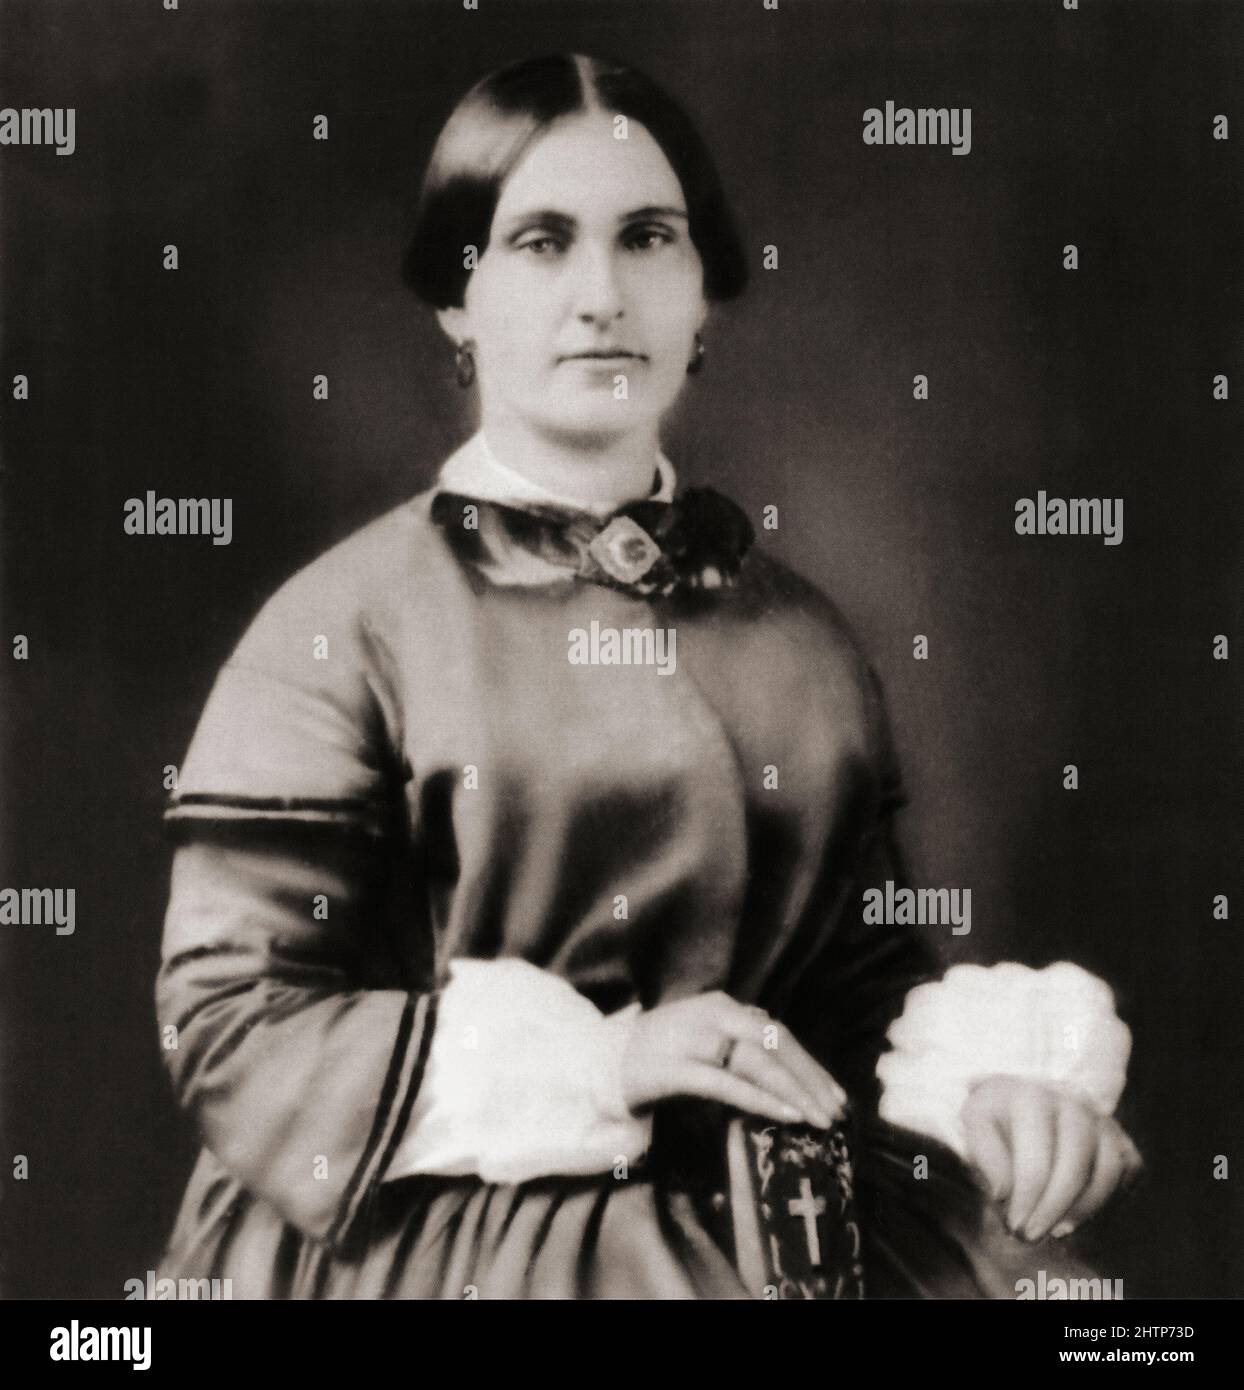 Mary Surratt, full name Mary Elizabeth Jenkins Surratt, c. 1820 - 1865.  American, executed by hanging for involvement in conspiracy which resulted in assassination of American President Abraham Lincoln.  She maintained her innocence to the end. Stock Photo